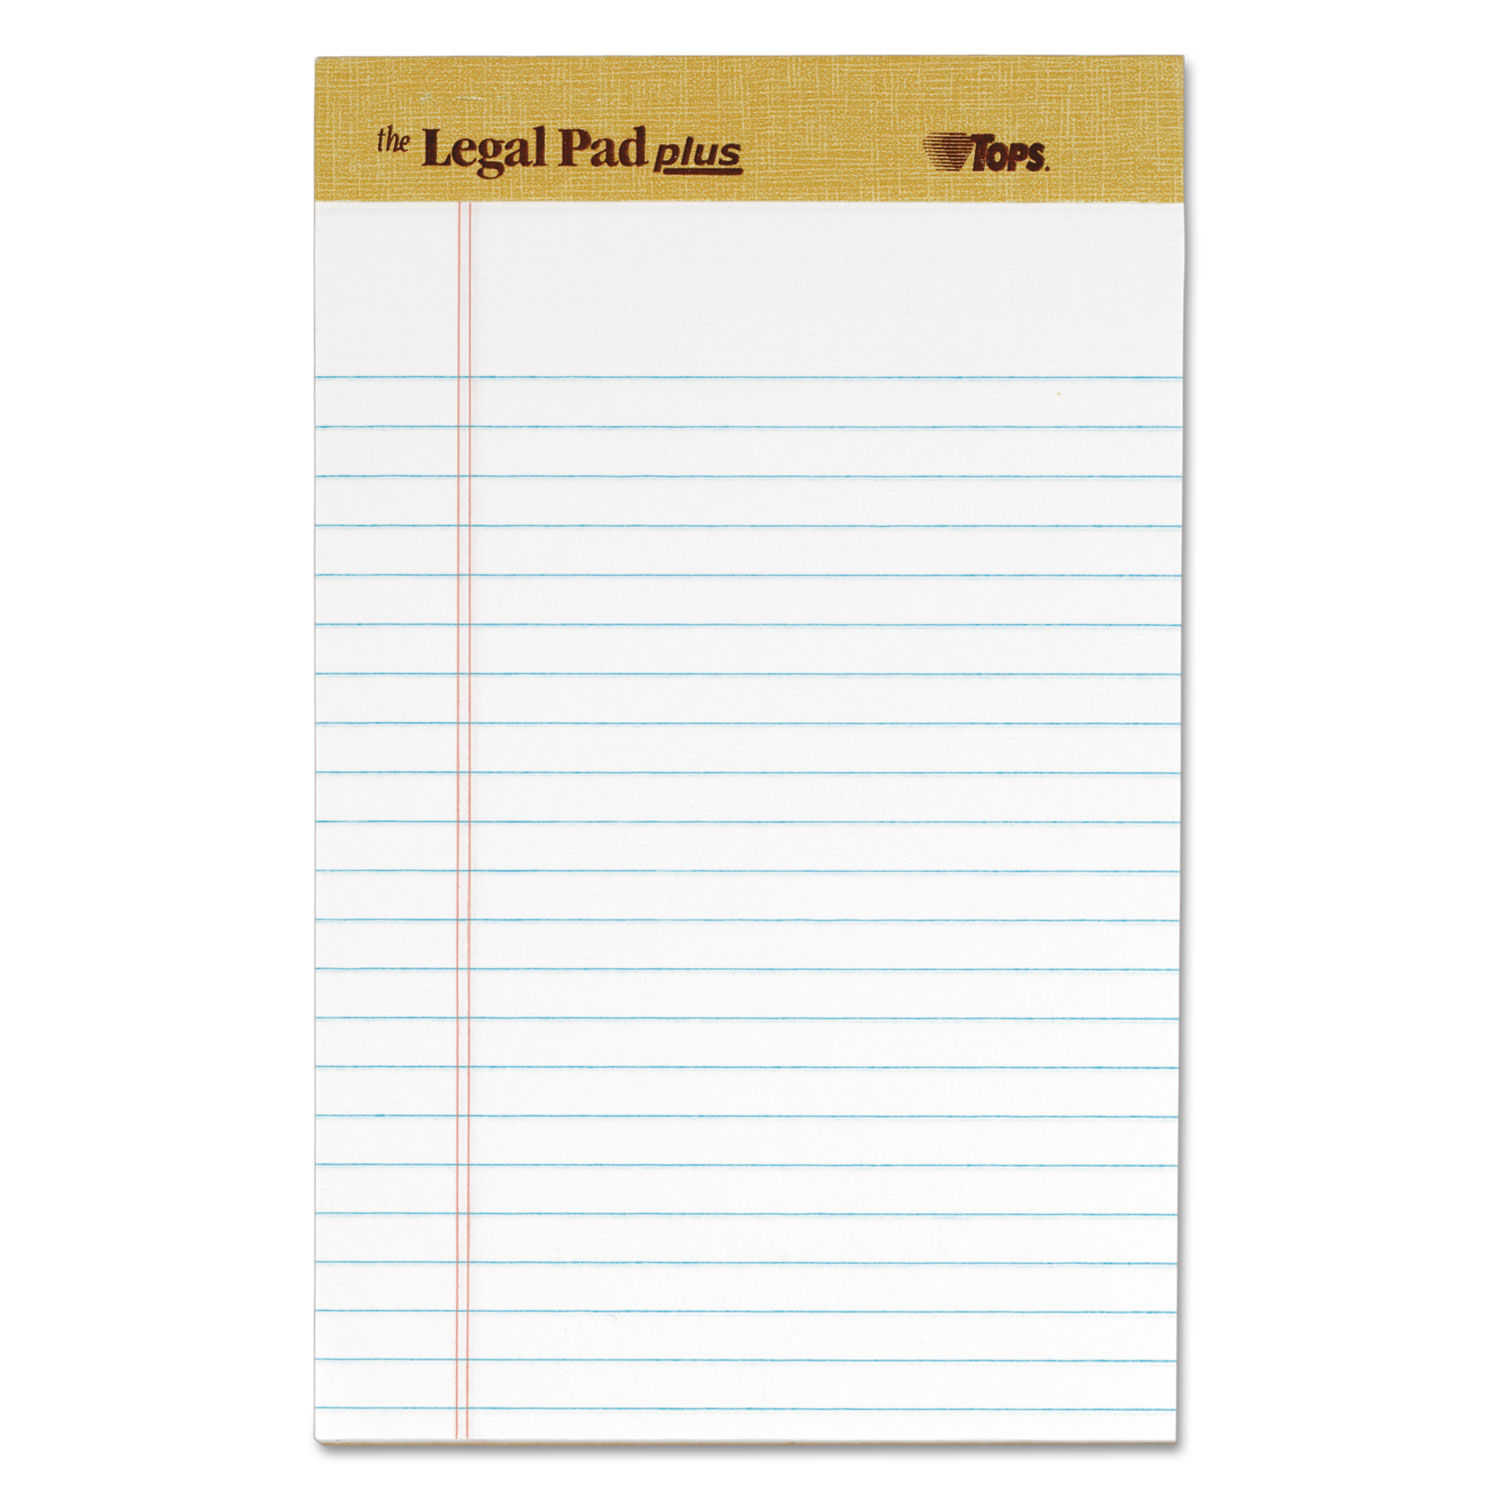 The Legal Pad